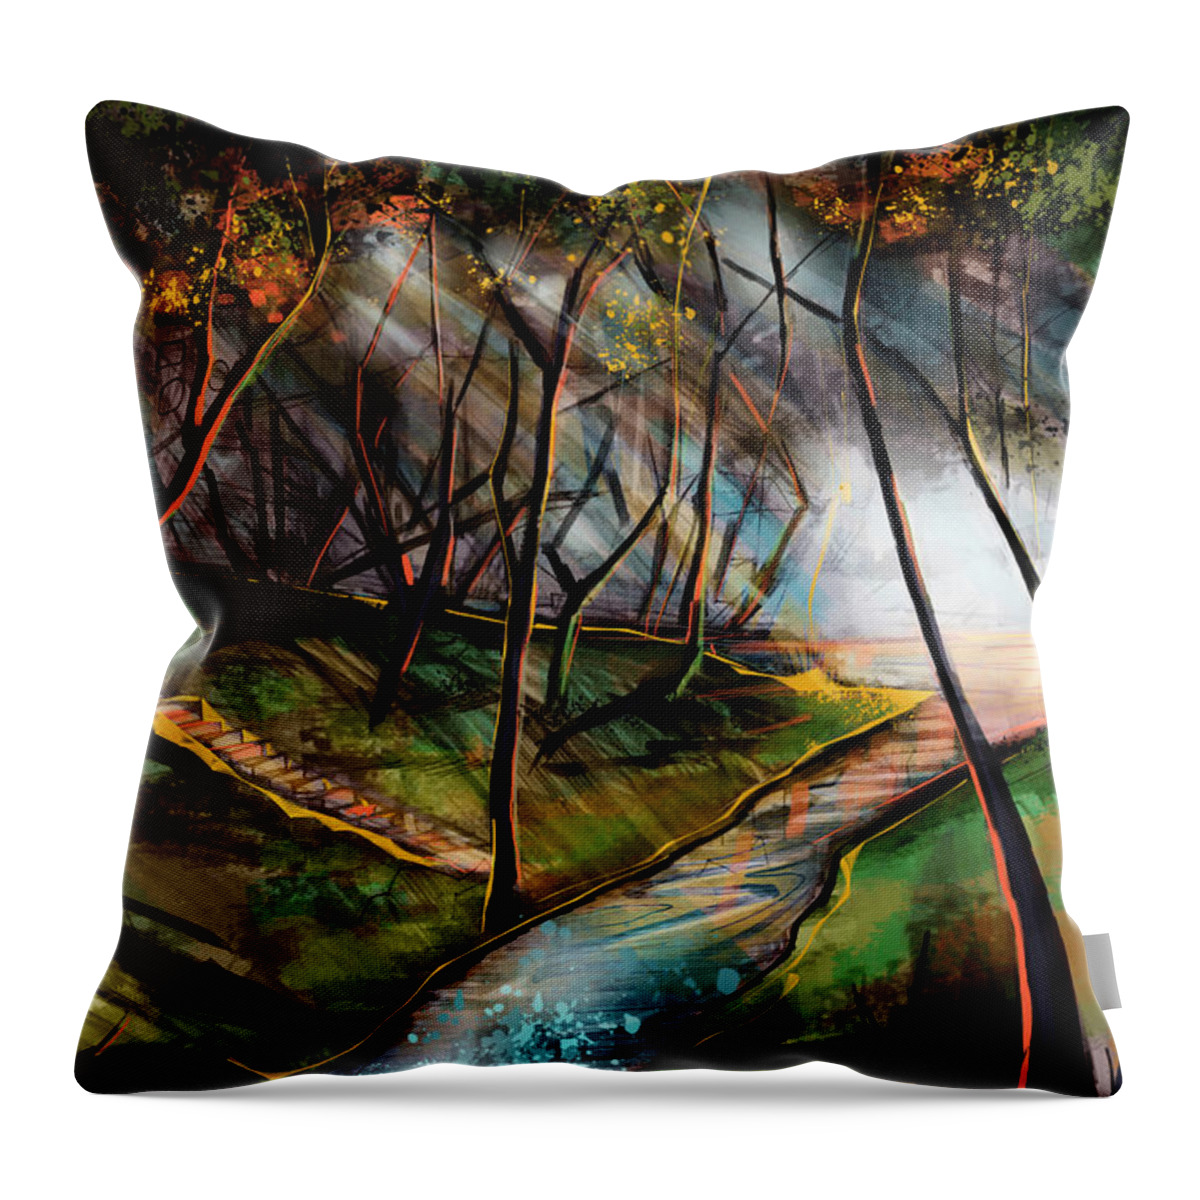 Take Me To The River Throw Pillow featuring the painting Take Me To The River by John Gholson